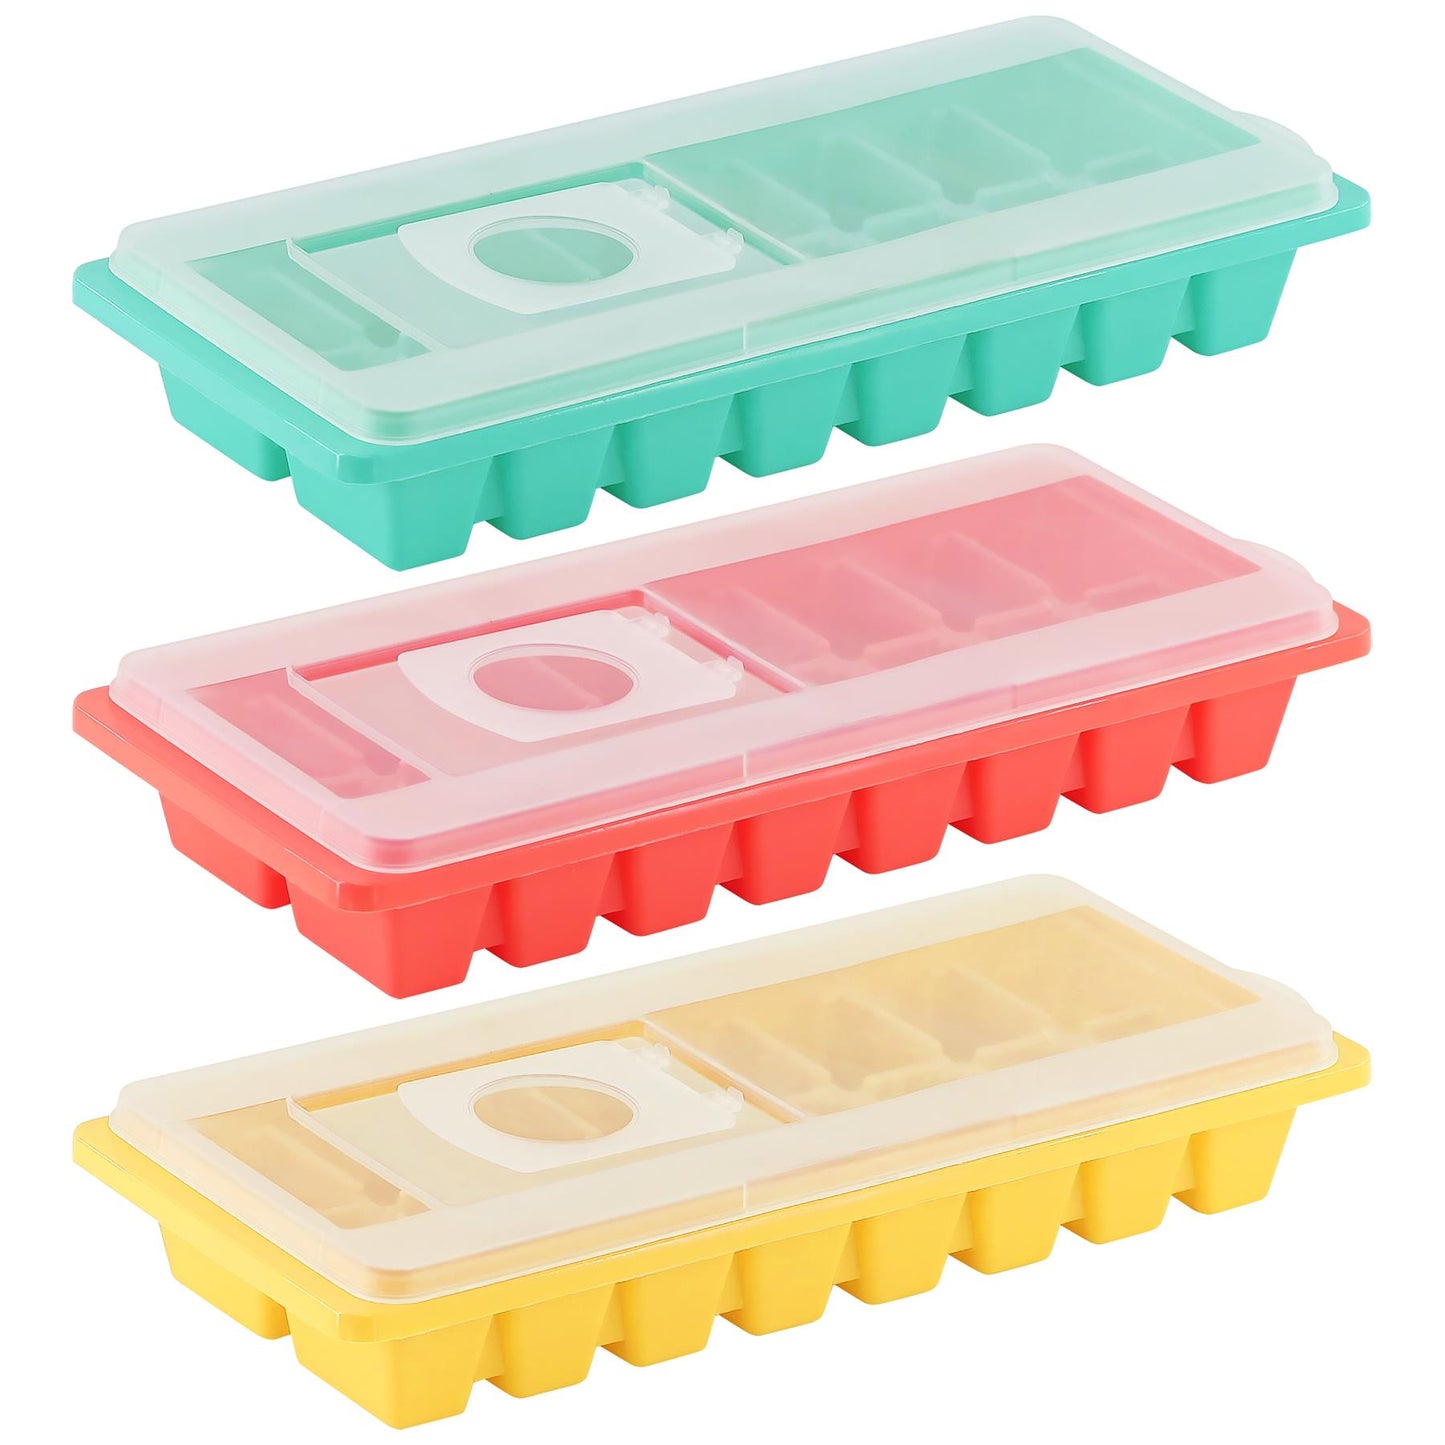 16 Cubes Silicone Ice Cube Tray With Lid by GEEZY - UKBuyZone